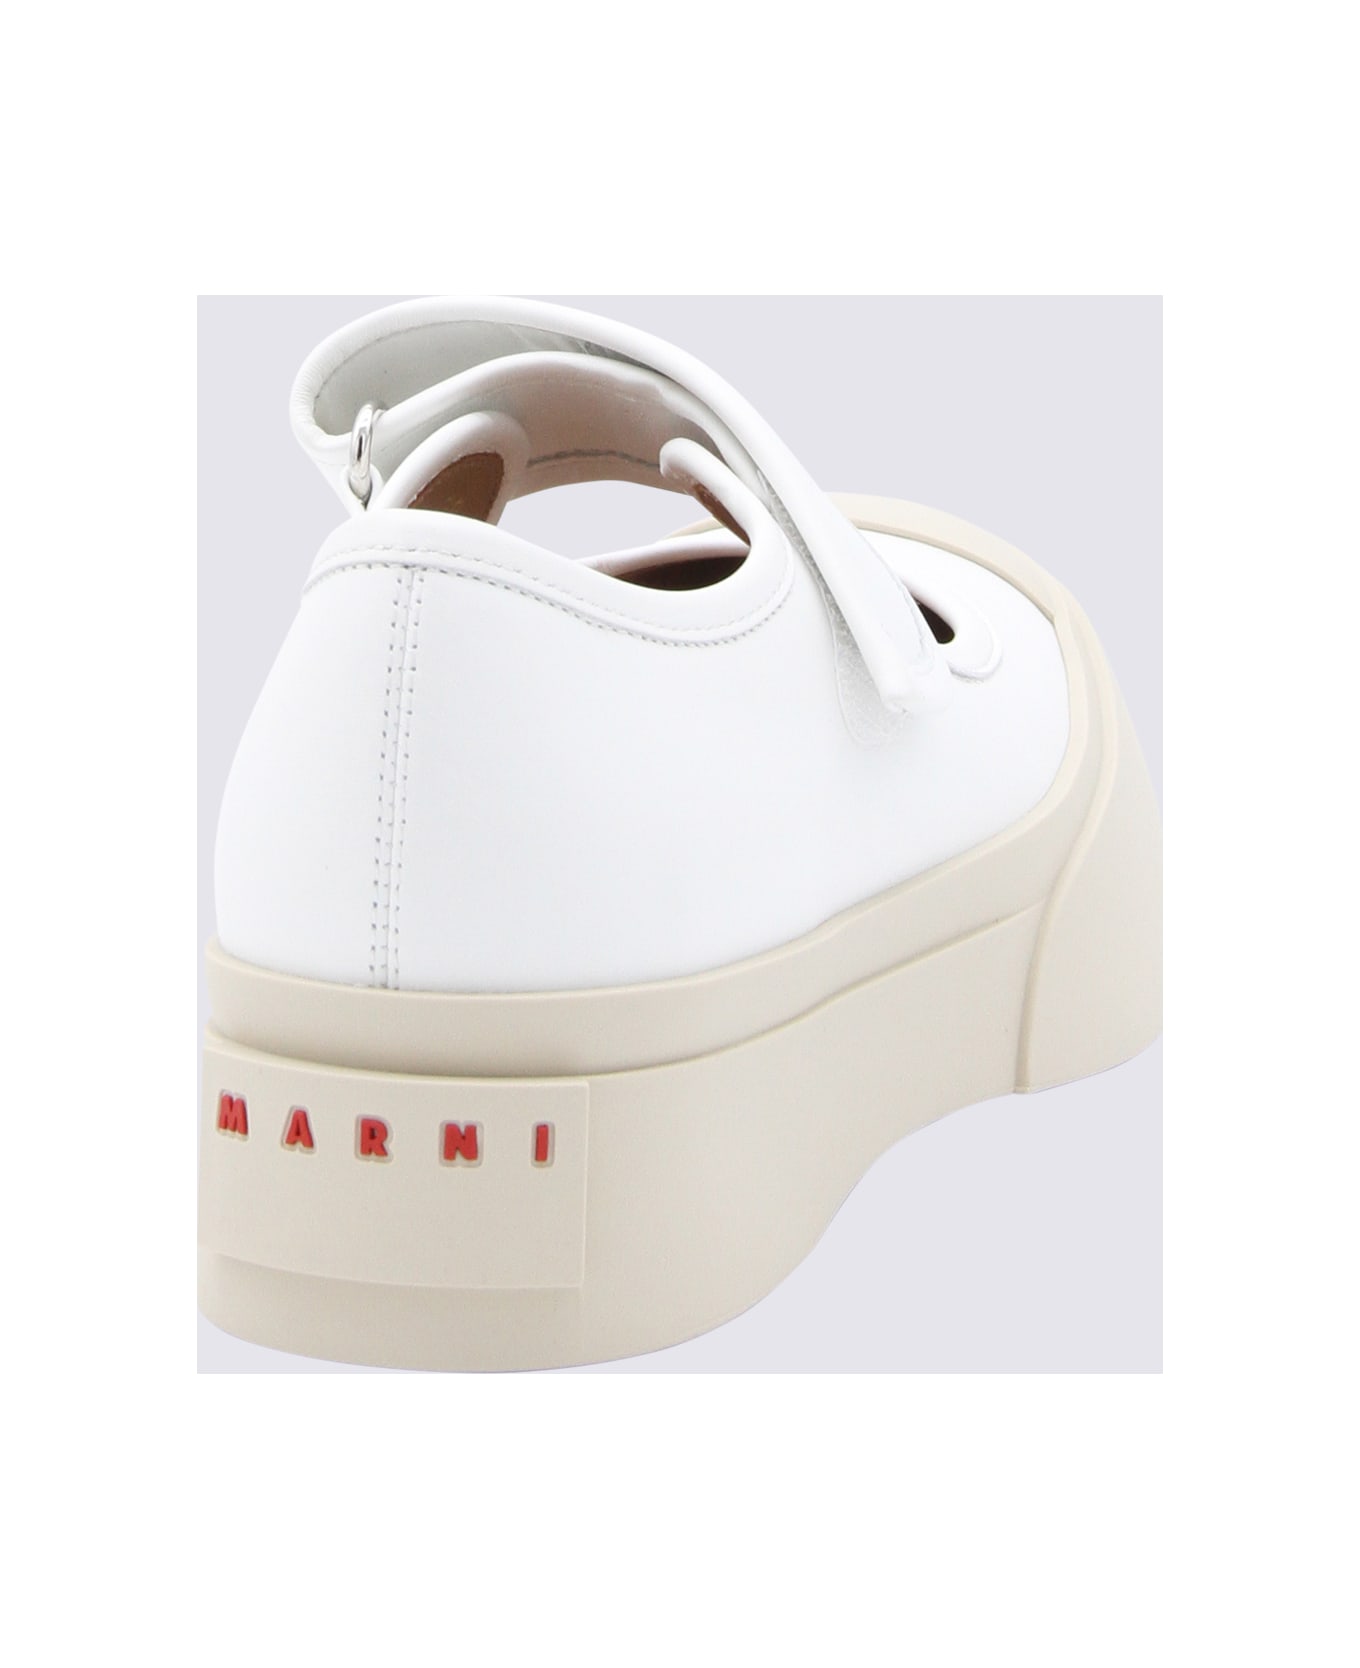 Marni White Leather Sandals - Lily white